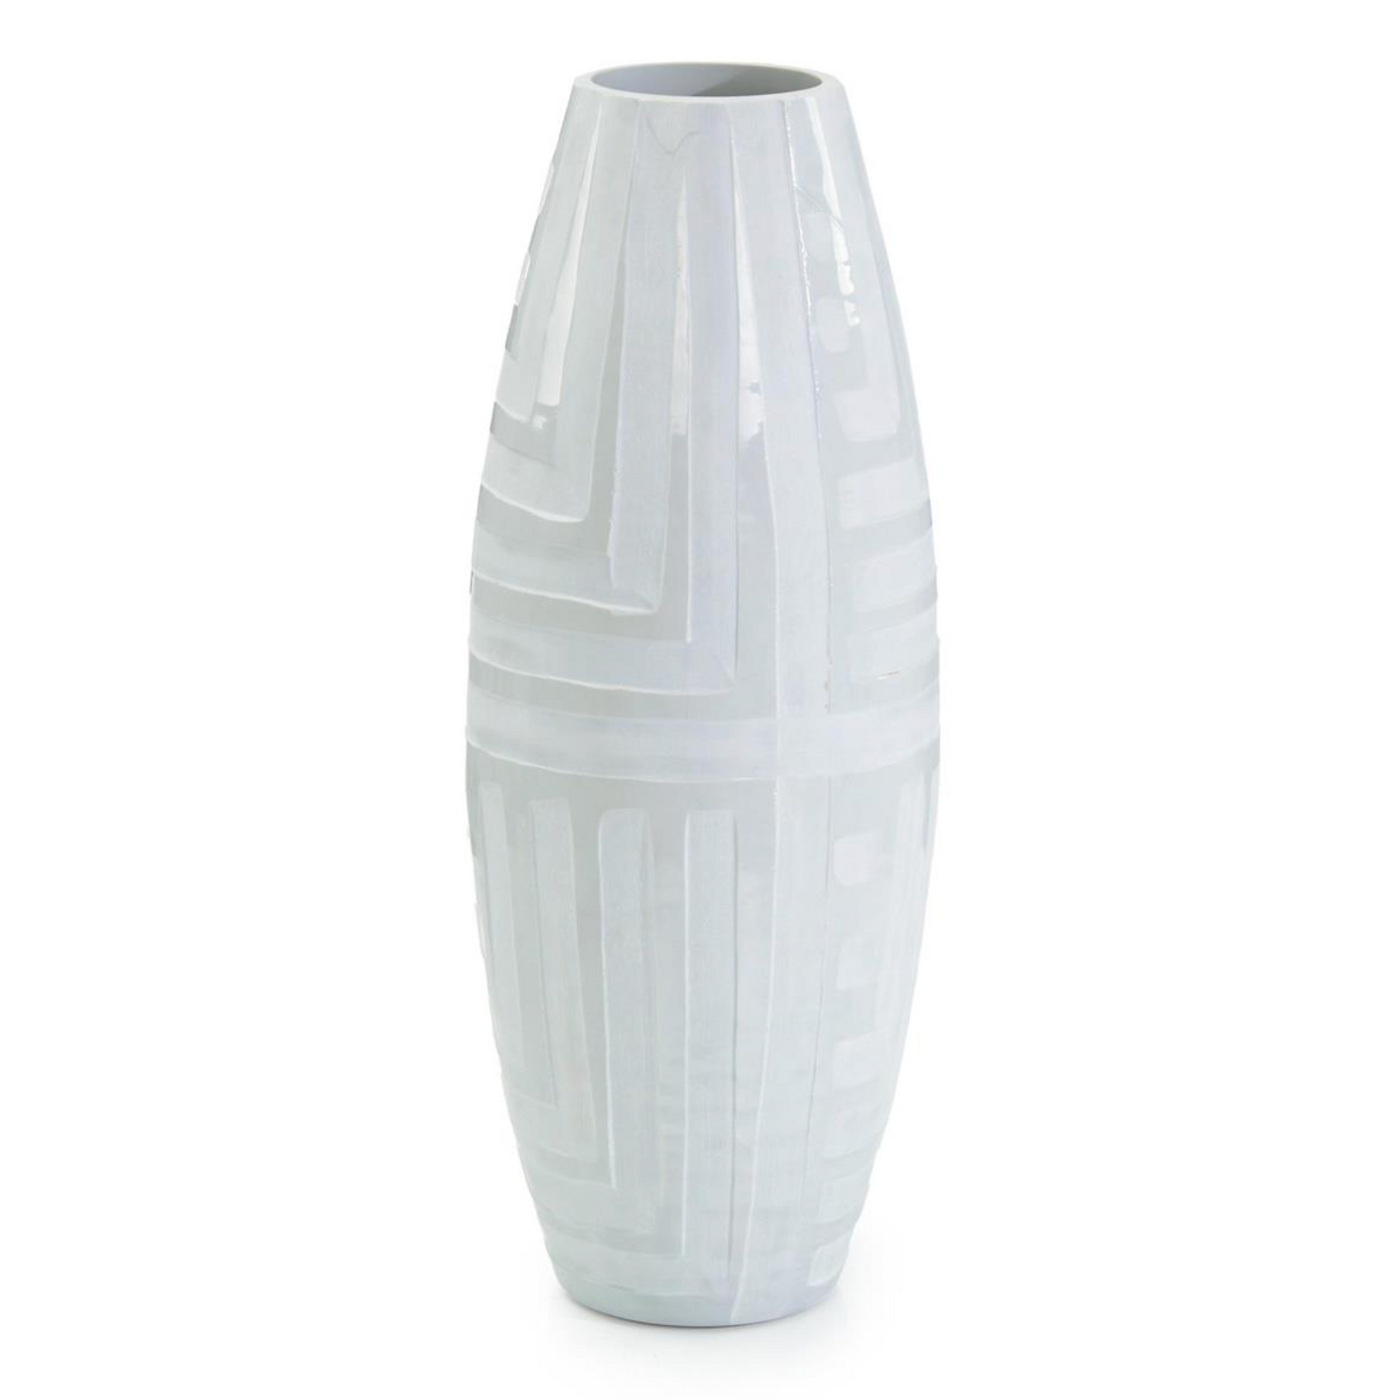 VASE MATTE GREY GEOMETRIC (Available in 3 Sizes)